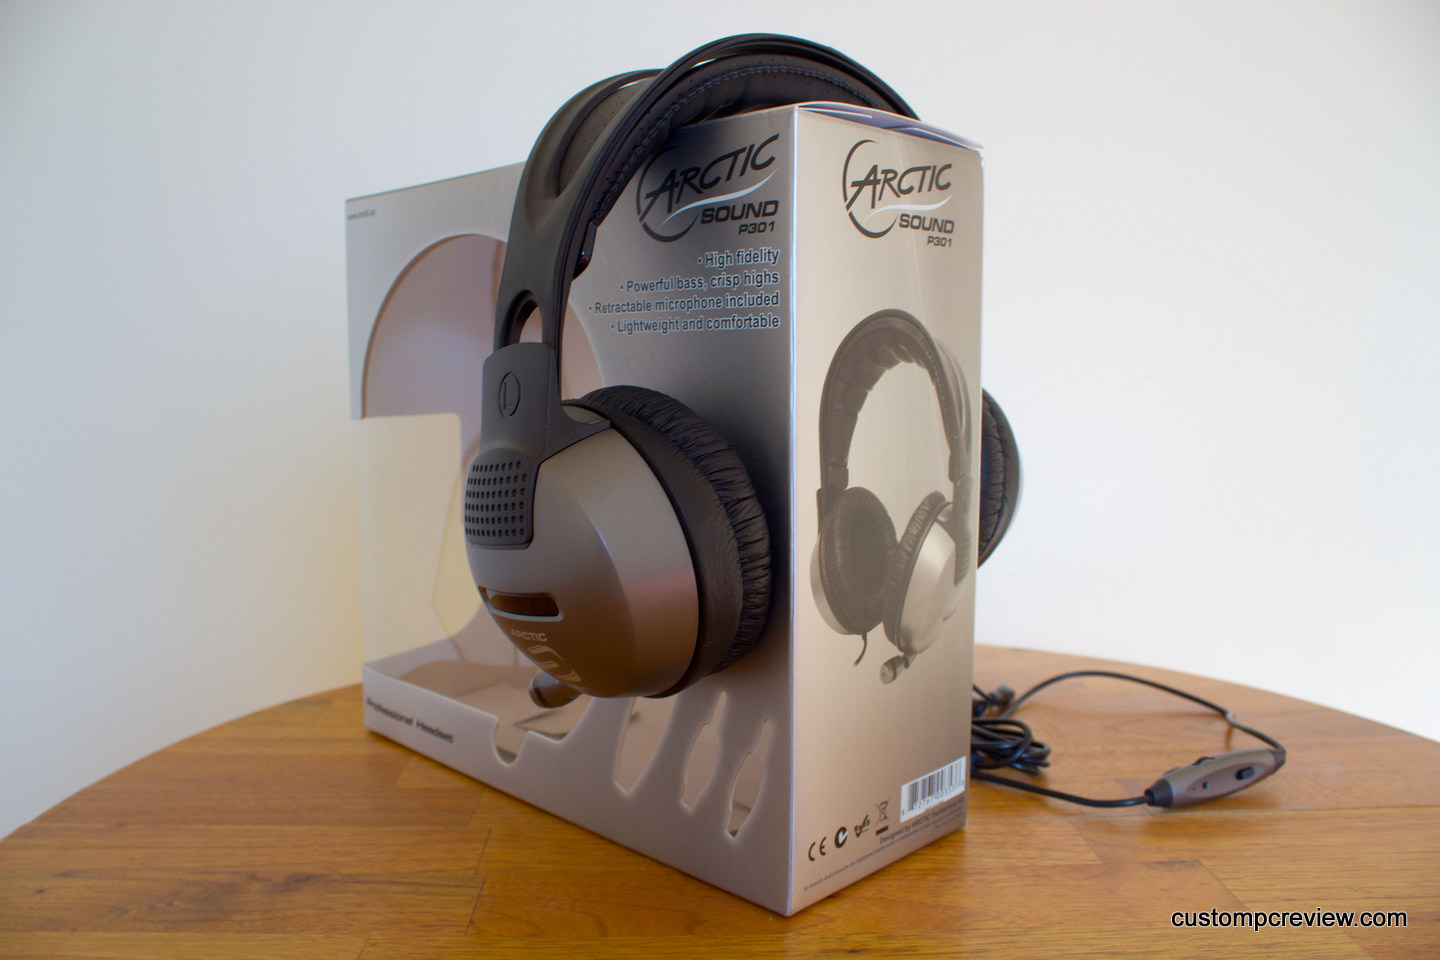 ARCTIC Sound P301 Professional Headset Review